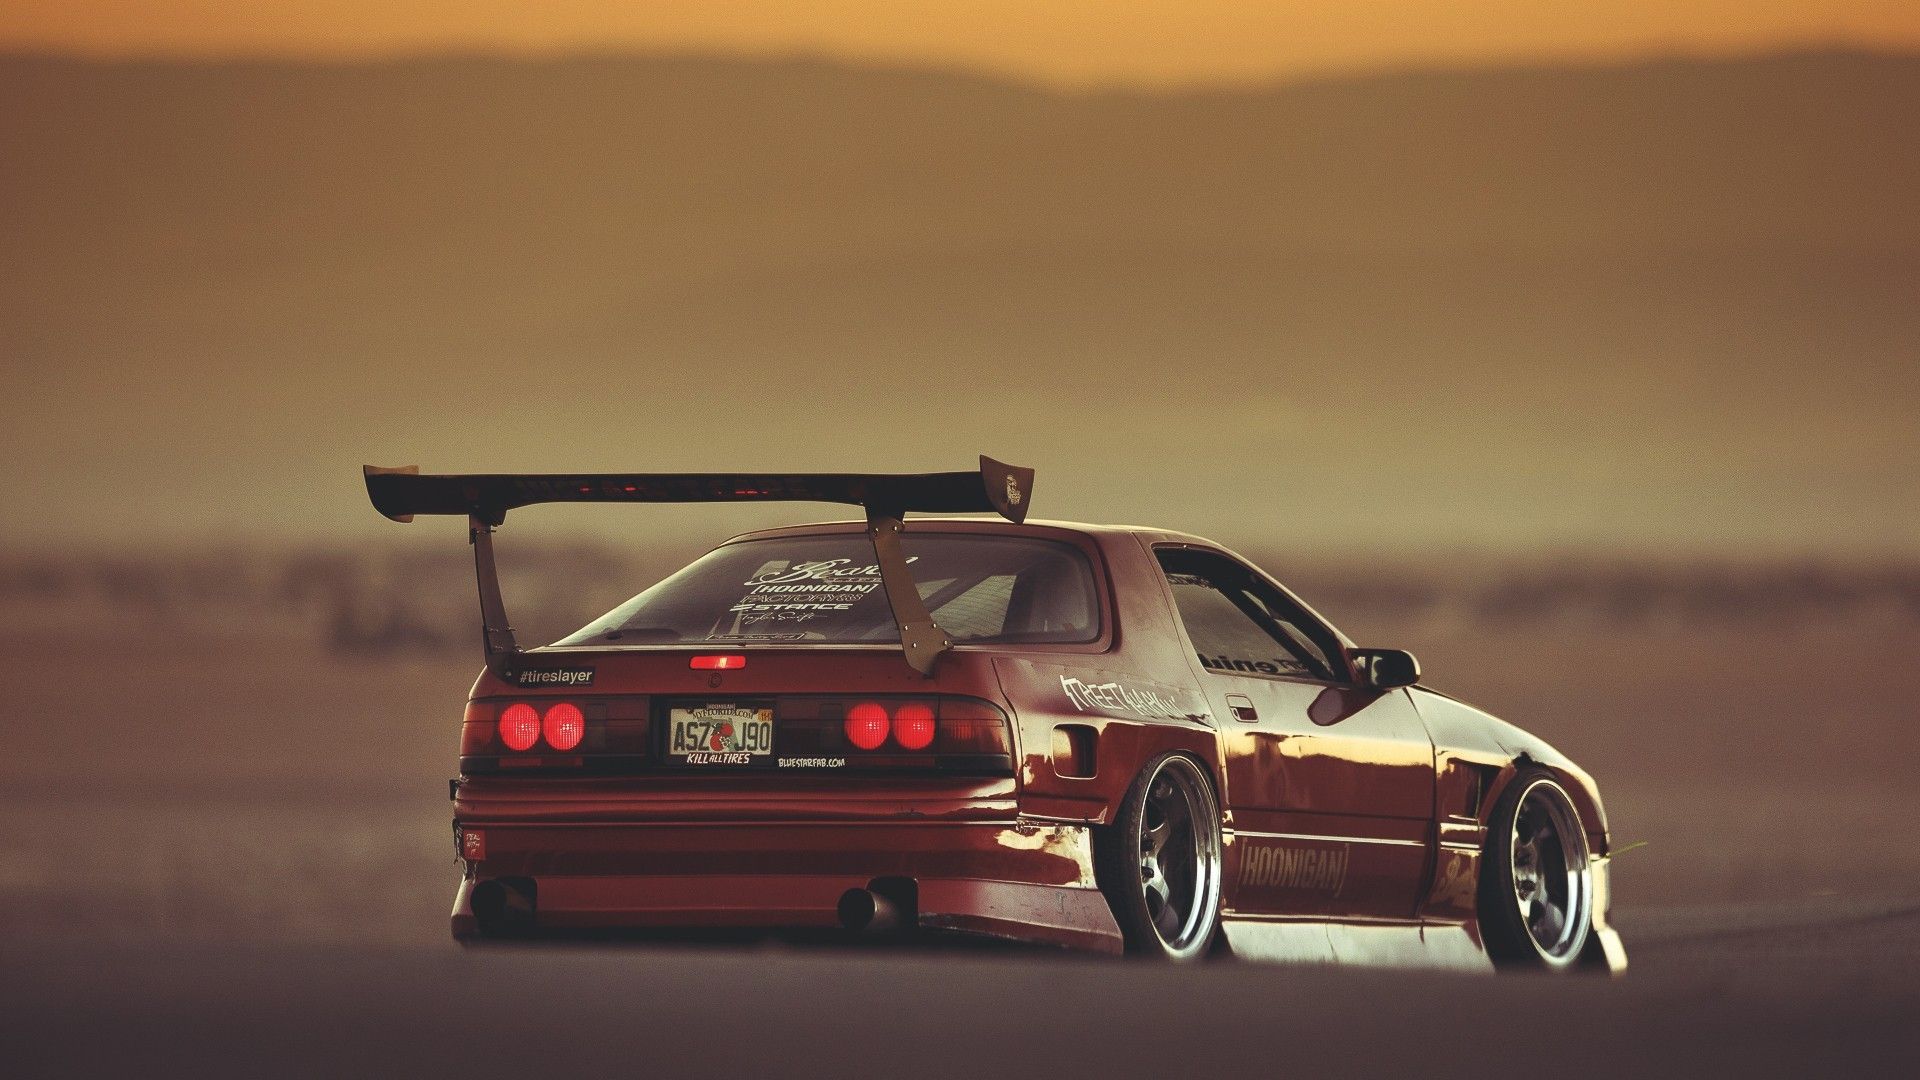 JDM Cars Aesthetic Wallpapers - Wallpaper Cave